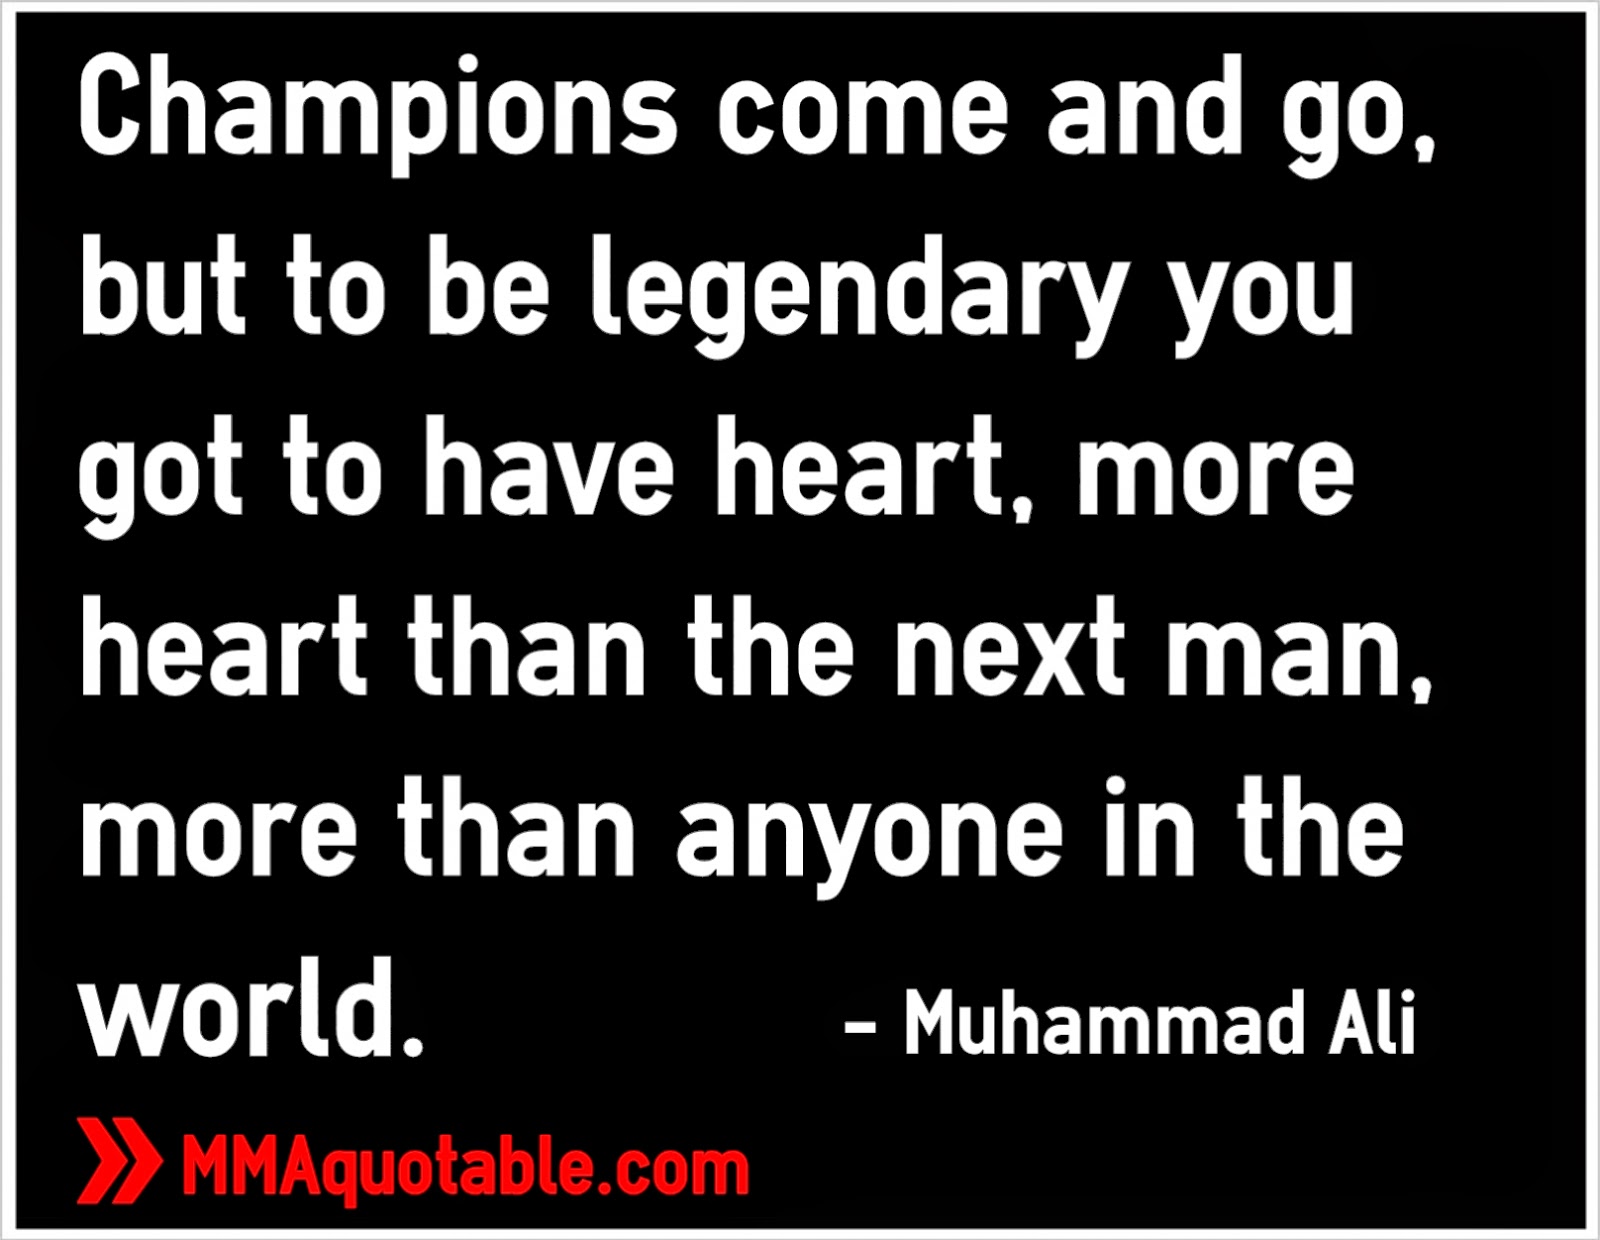 Muhammad Ali Quotes Motivational and Inspirational